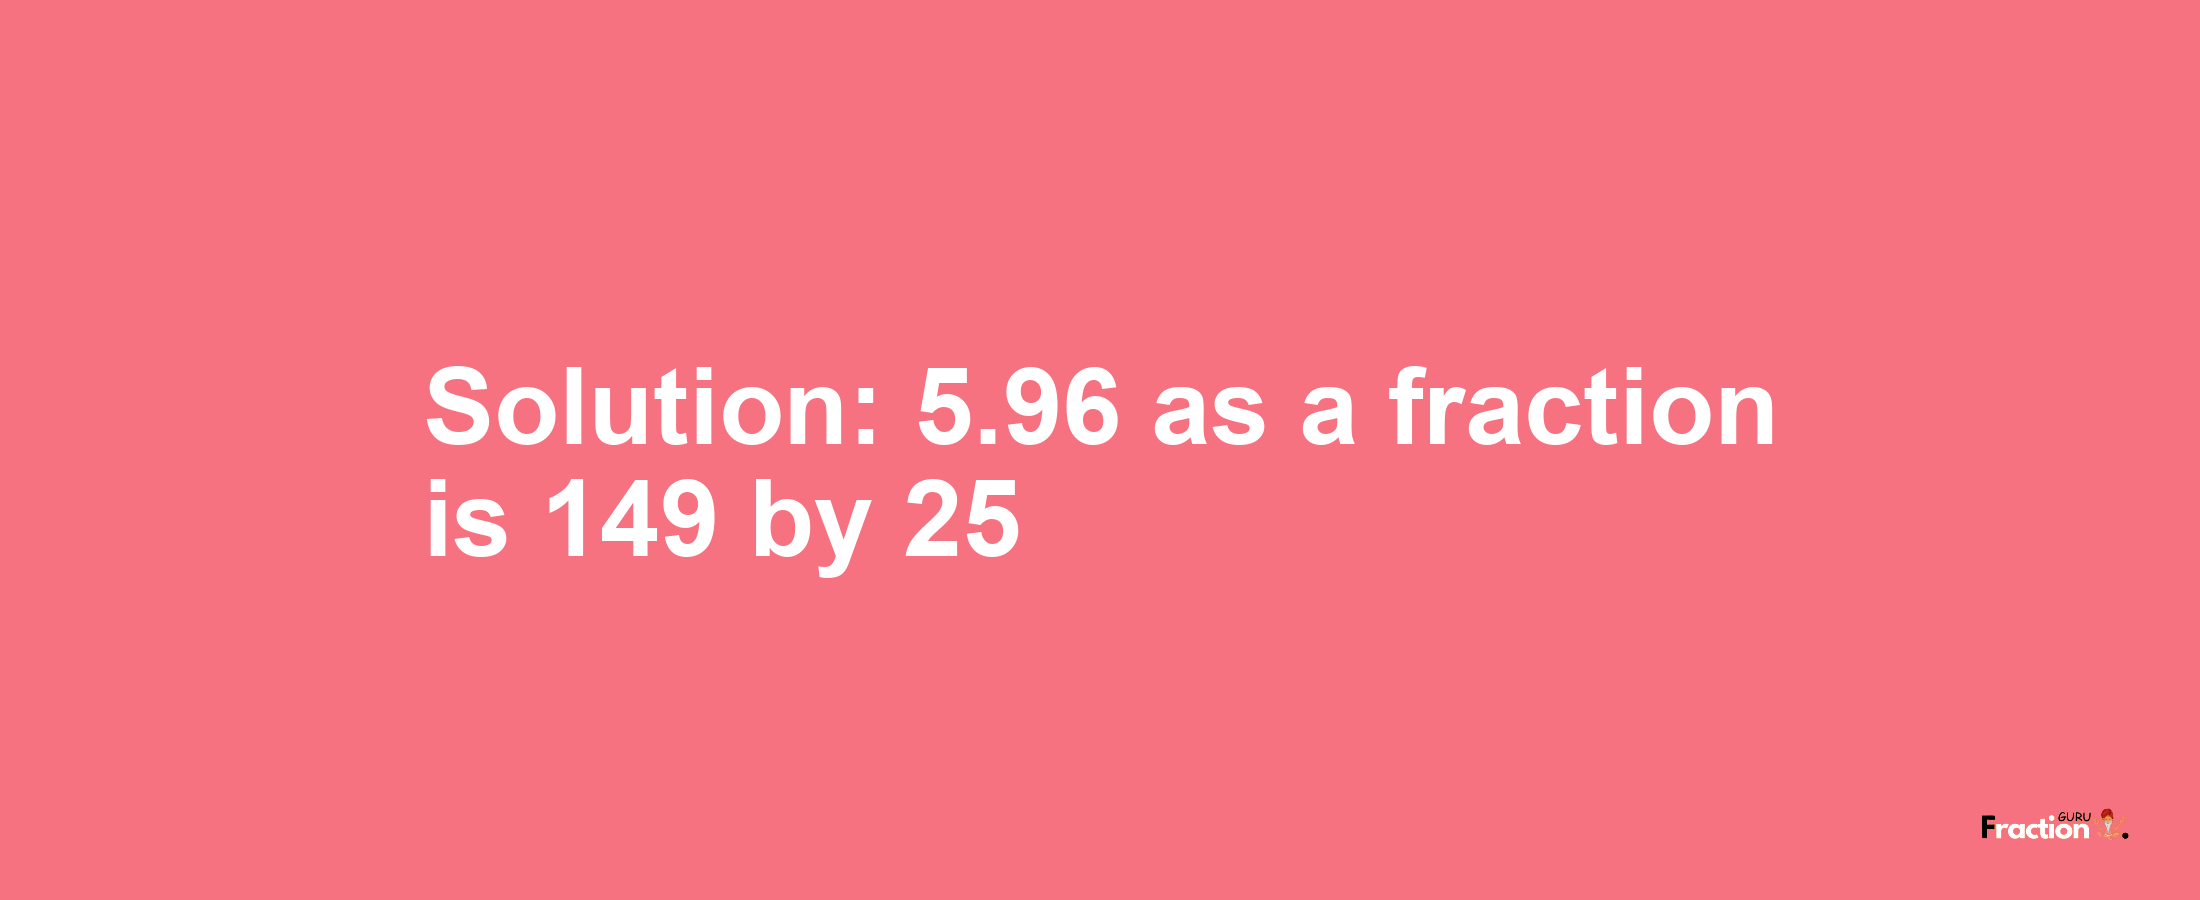 Solution:5.96 as a fraction is 149/25